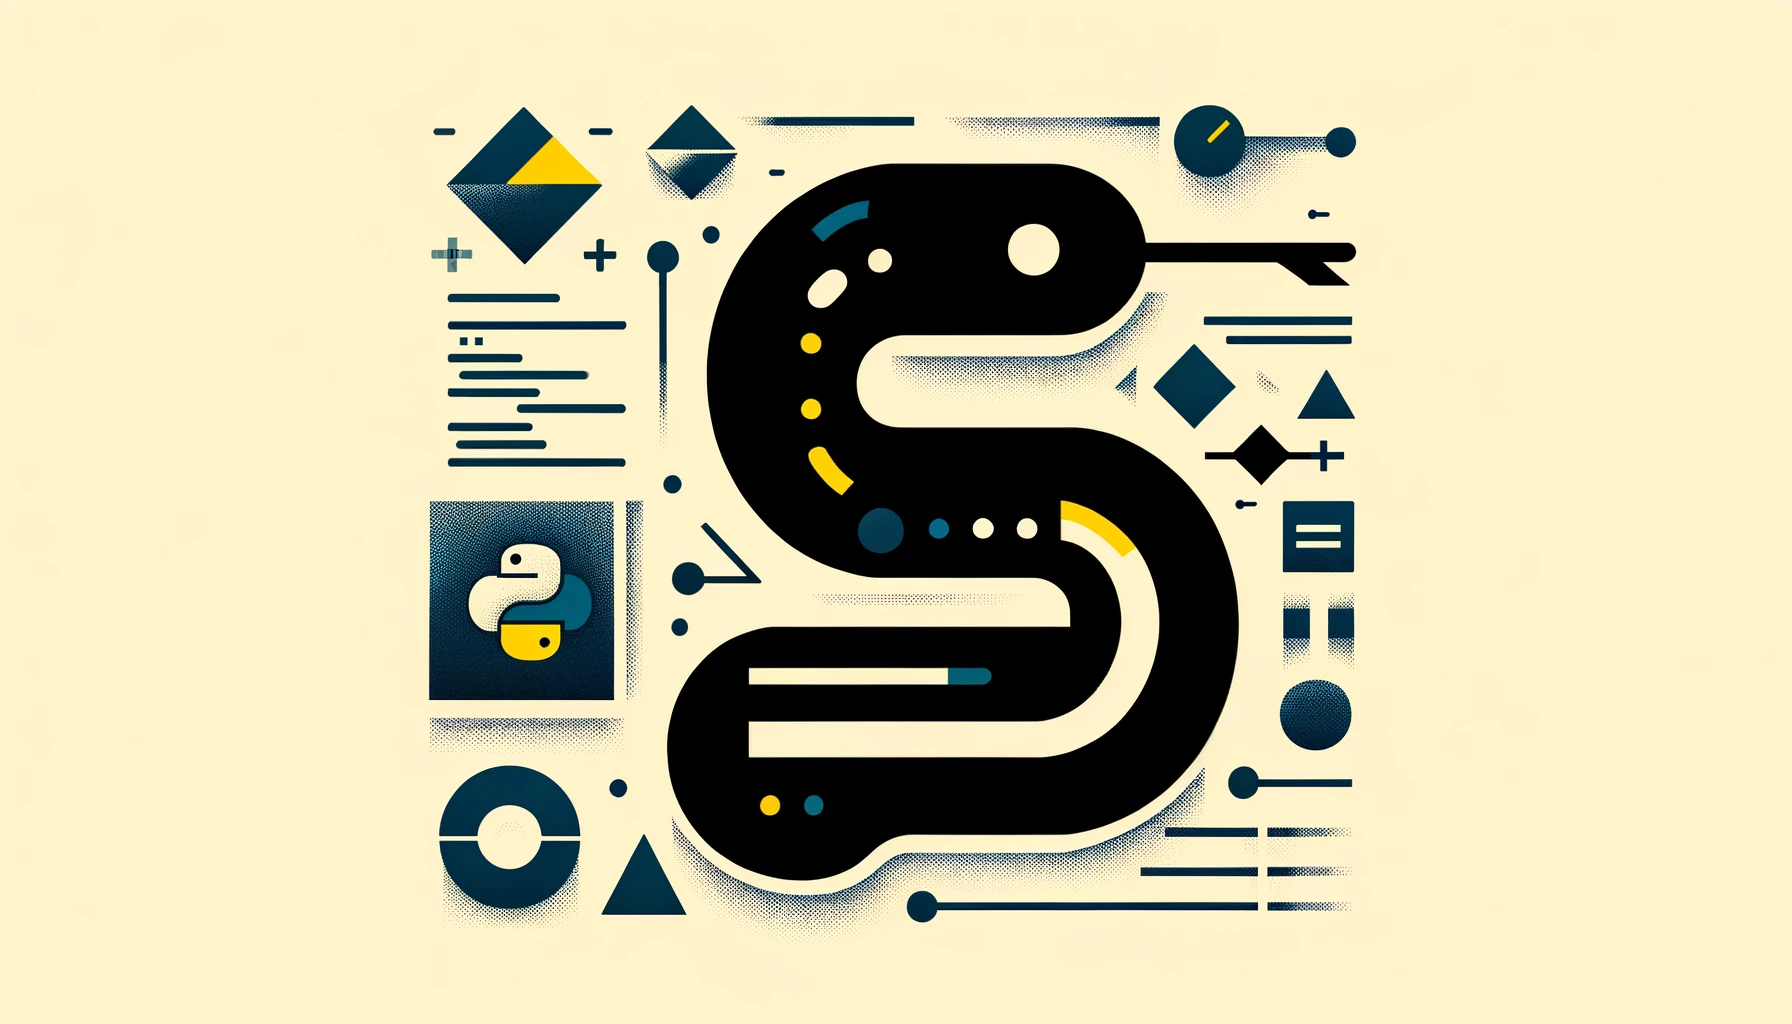 Abstract digital art representing advanced Python exception handling techniques and best practices, featuring stylized snake and error symbols in a modern, minimalistic design suitable for technical audiences.